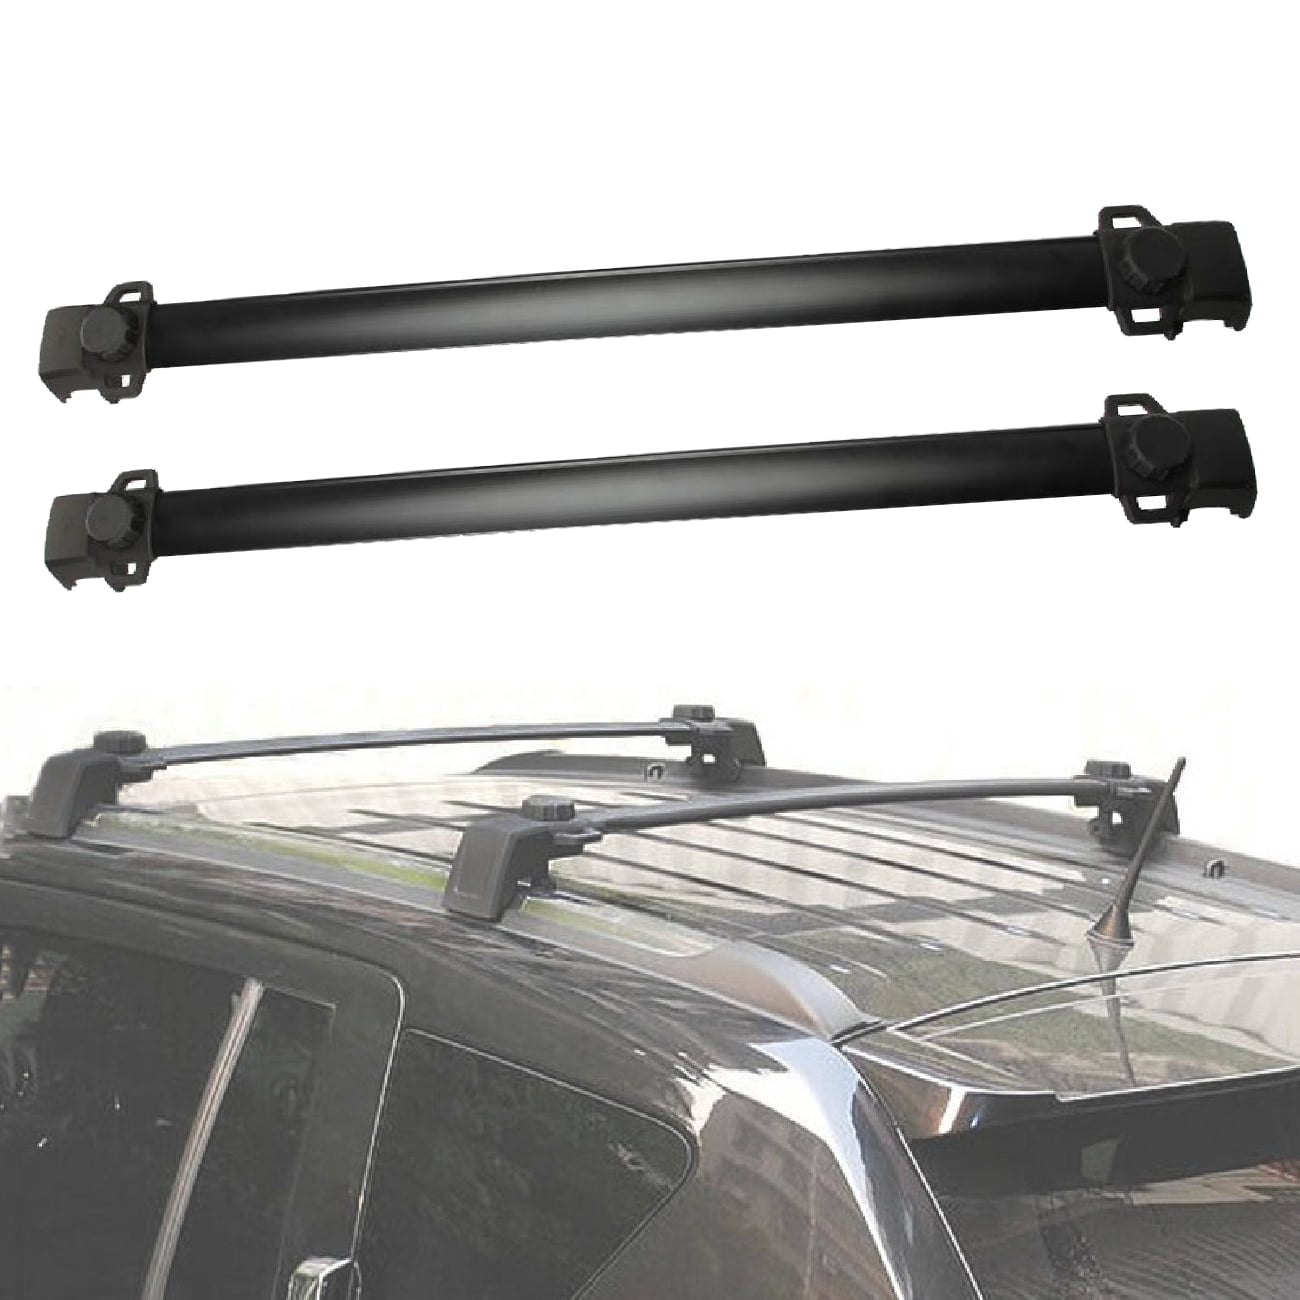 Beamnova Roof Rack Cross Bars for 2011-2016 Jeep Compass with Vertical Side Bars, Cargo Carrier 2011 Jeep Compass Roof Rack Cross Bars